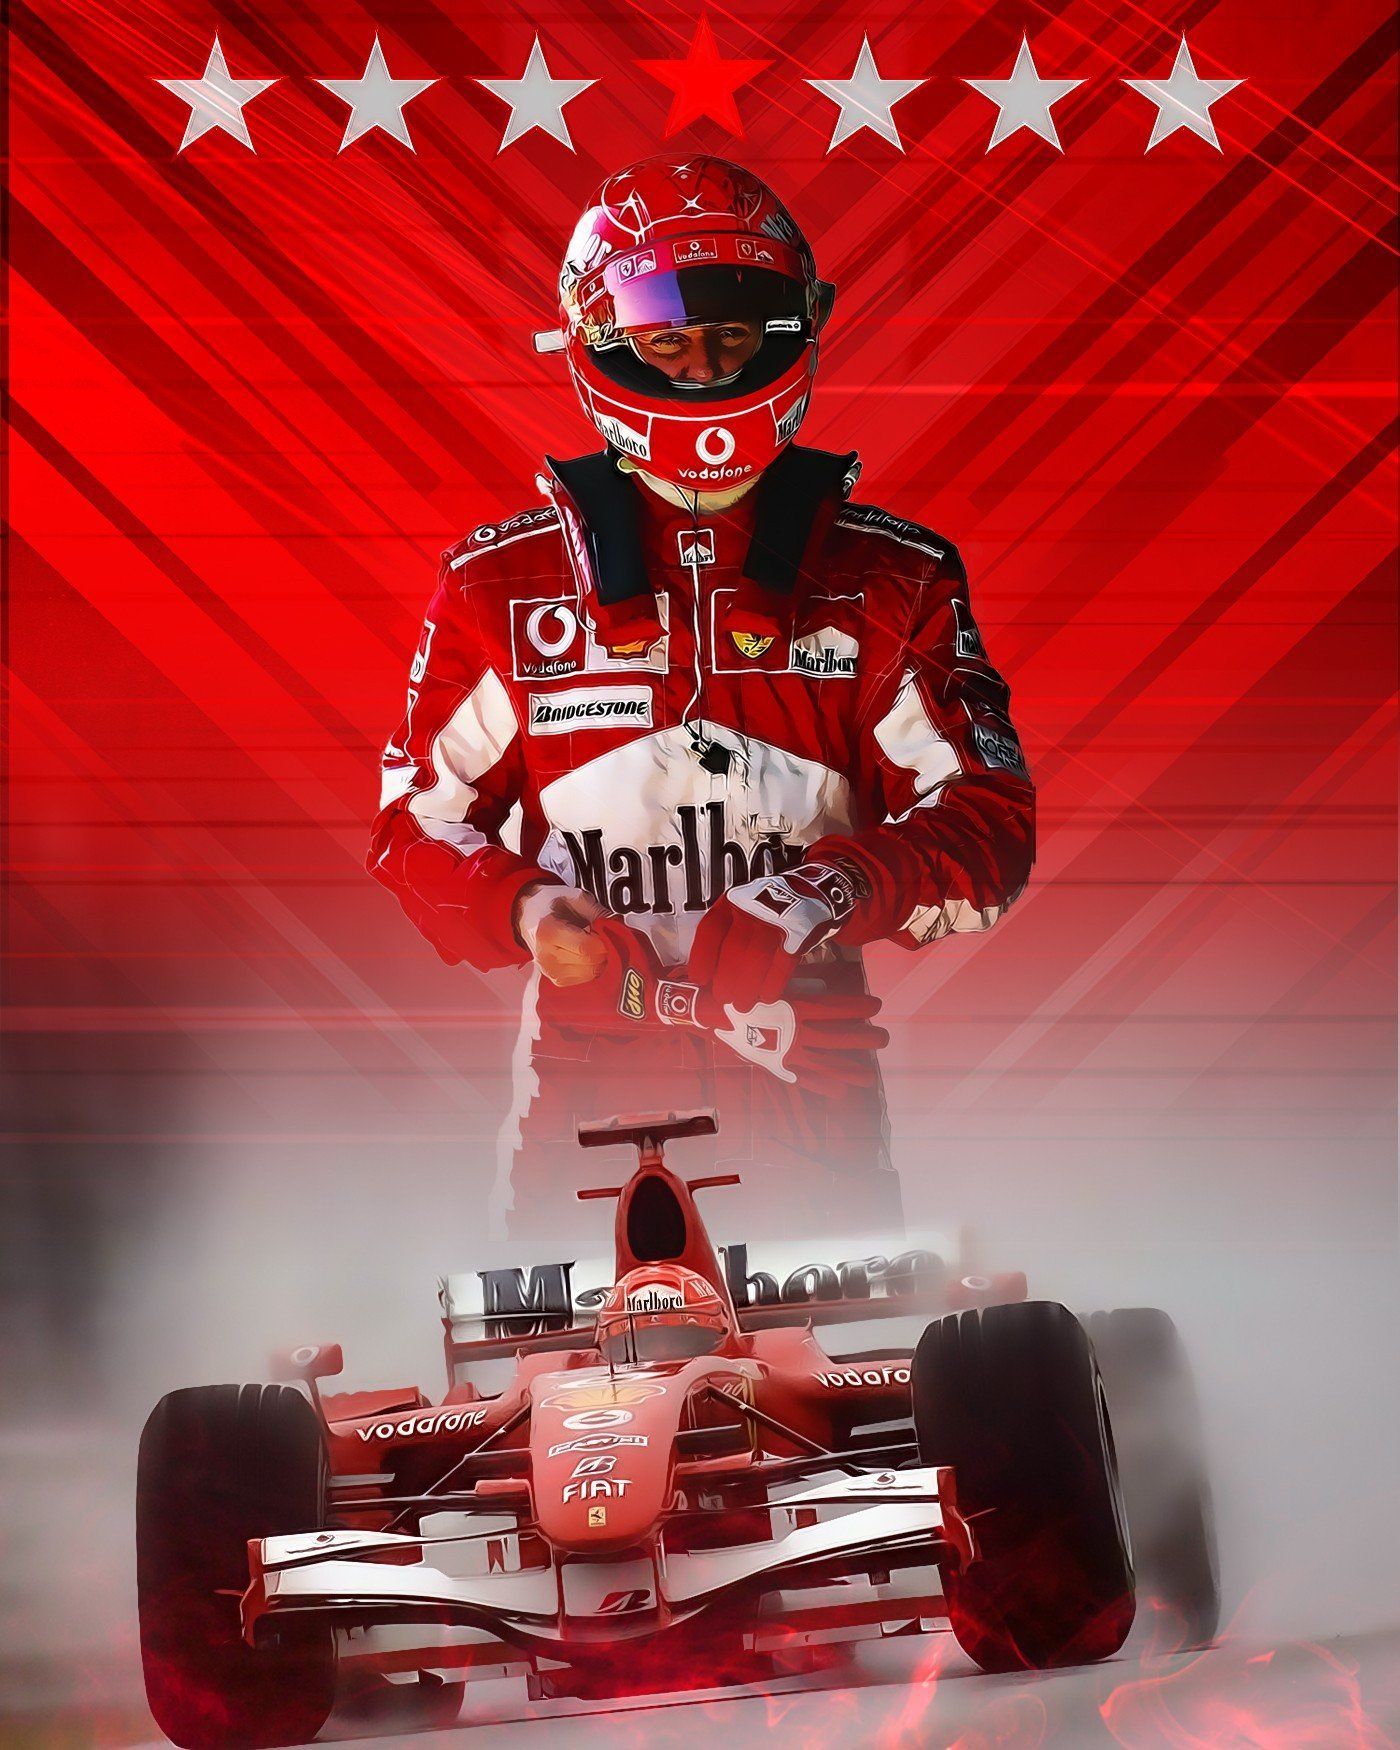 Schumacher wallpaper for mobile phone, tablet, desktop computer and other devices HD and 4K wallpaper. Schumacher wallpaper, Schumacher, Ferrari racing